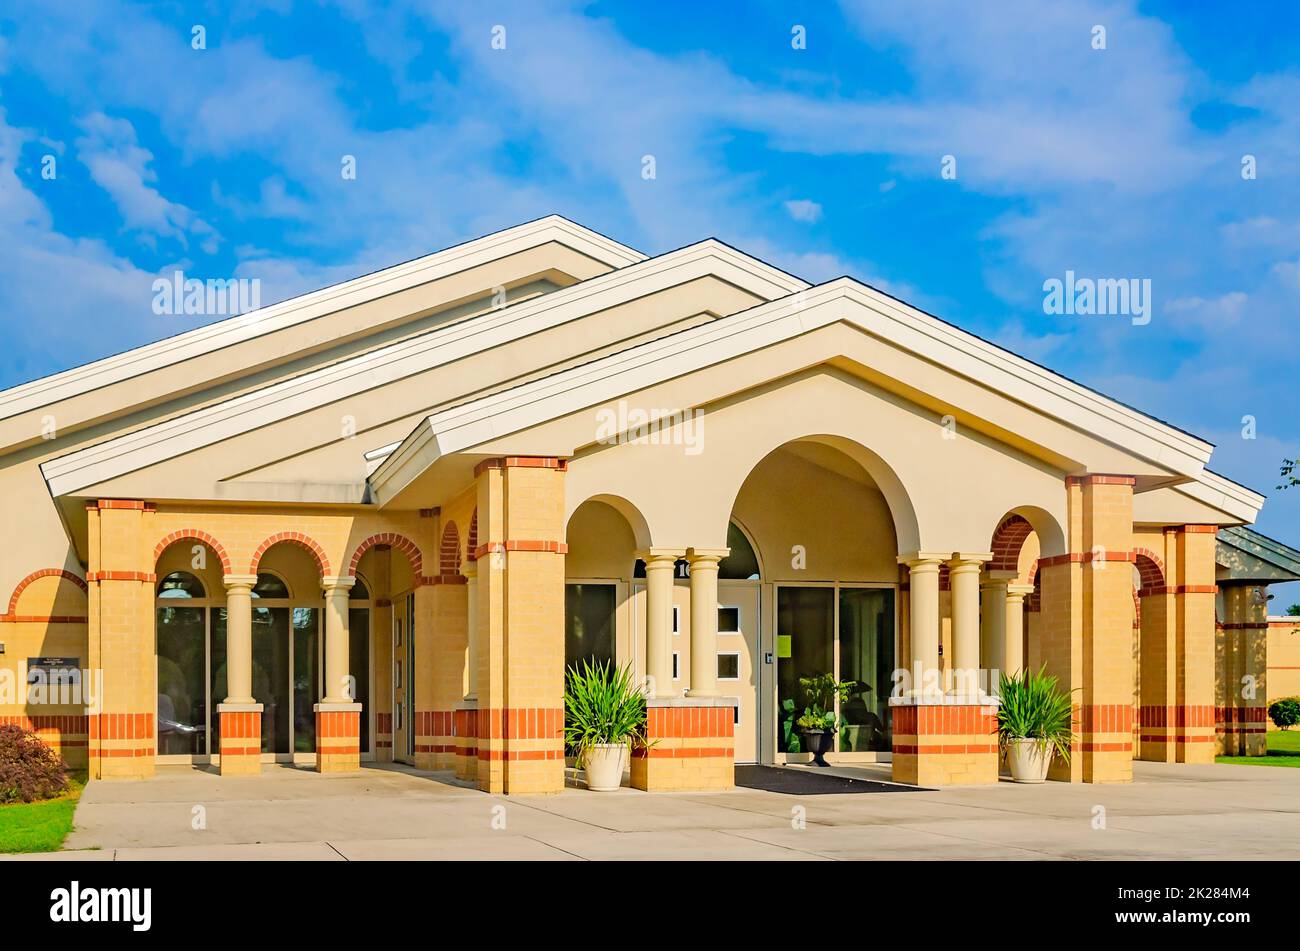 W.J. Carroll Intermediate School is pictured, Sept. 8, 2022, in Daphne, Alabama. The school has an average enrollment of 465 students in grades 4-6. Stock Photo